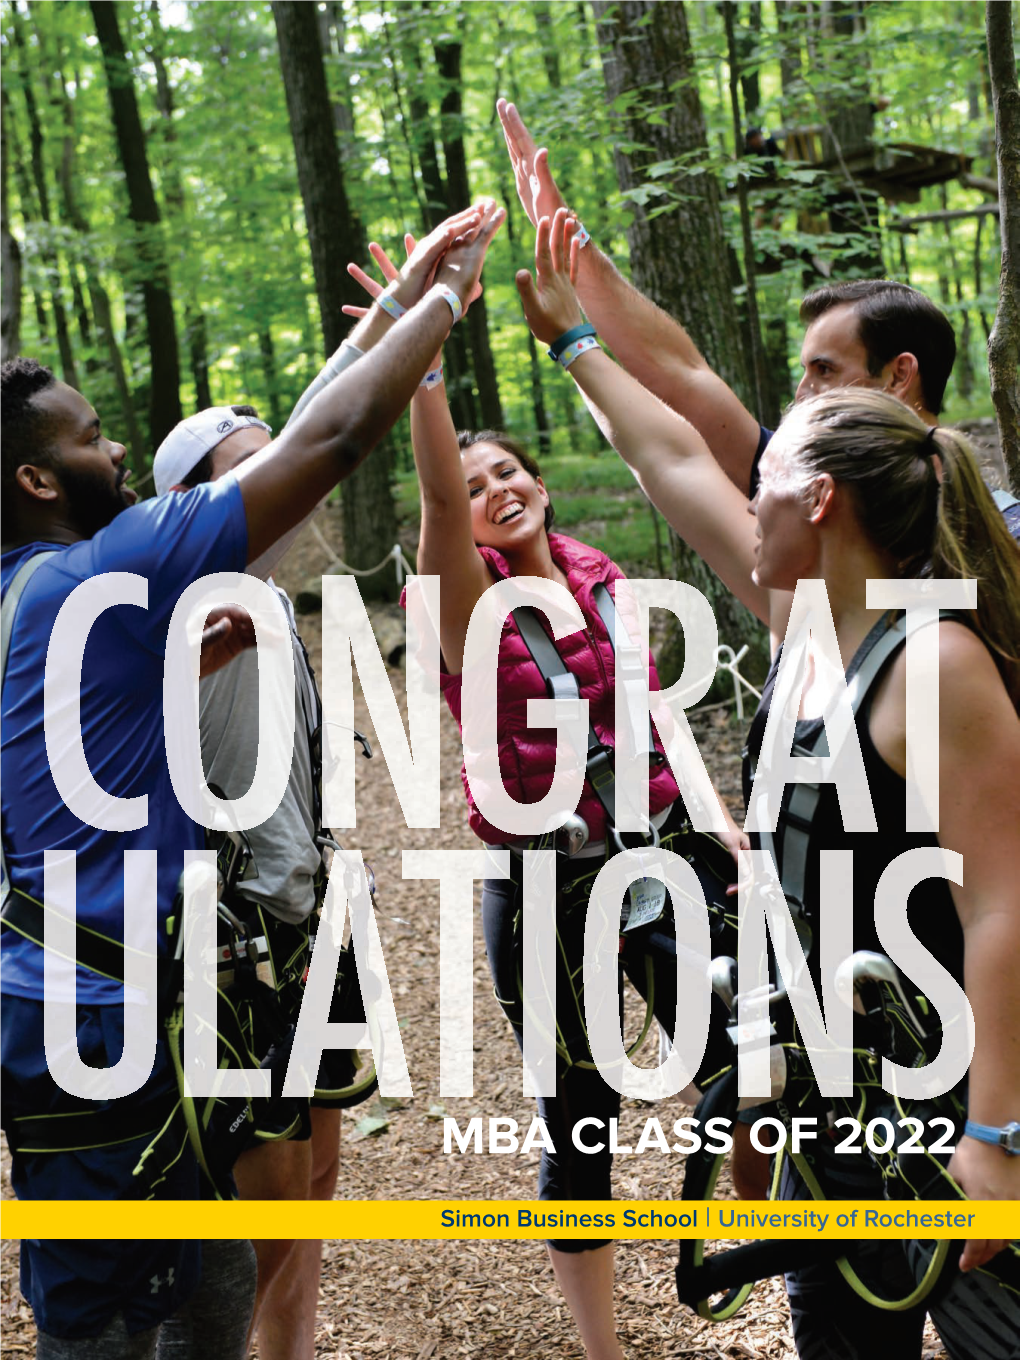 Mba Class of 2022